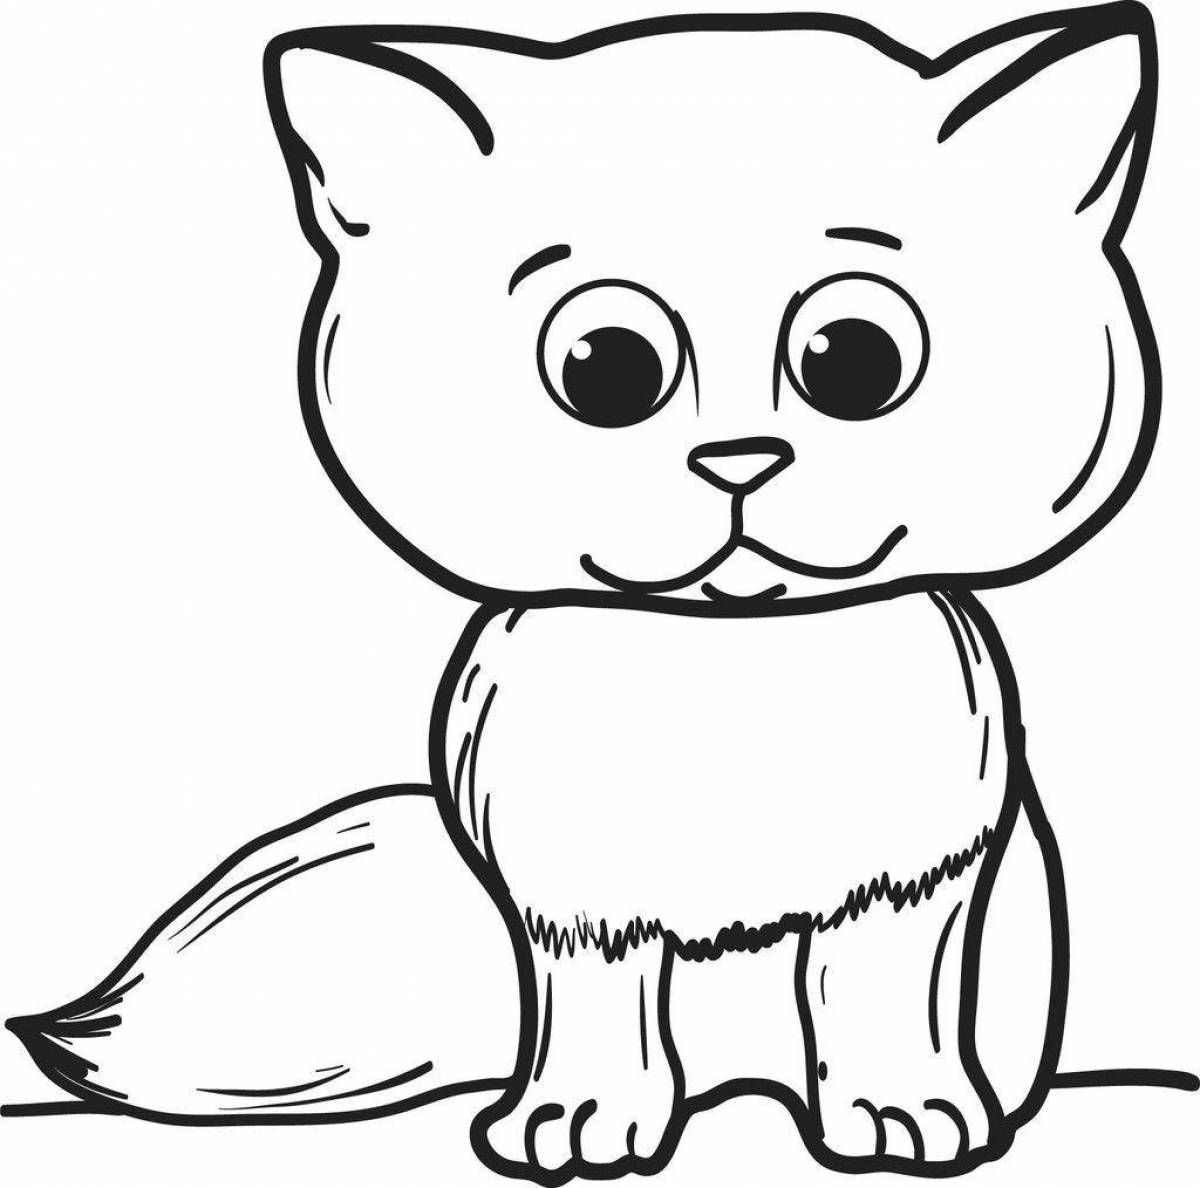 Magic coloring book for cats